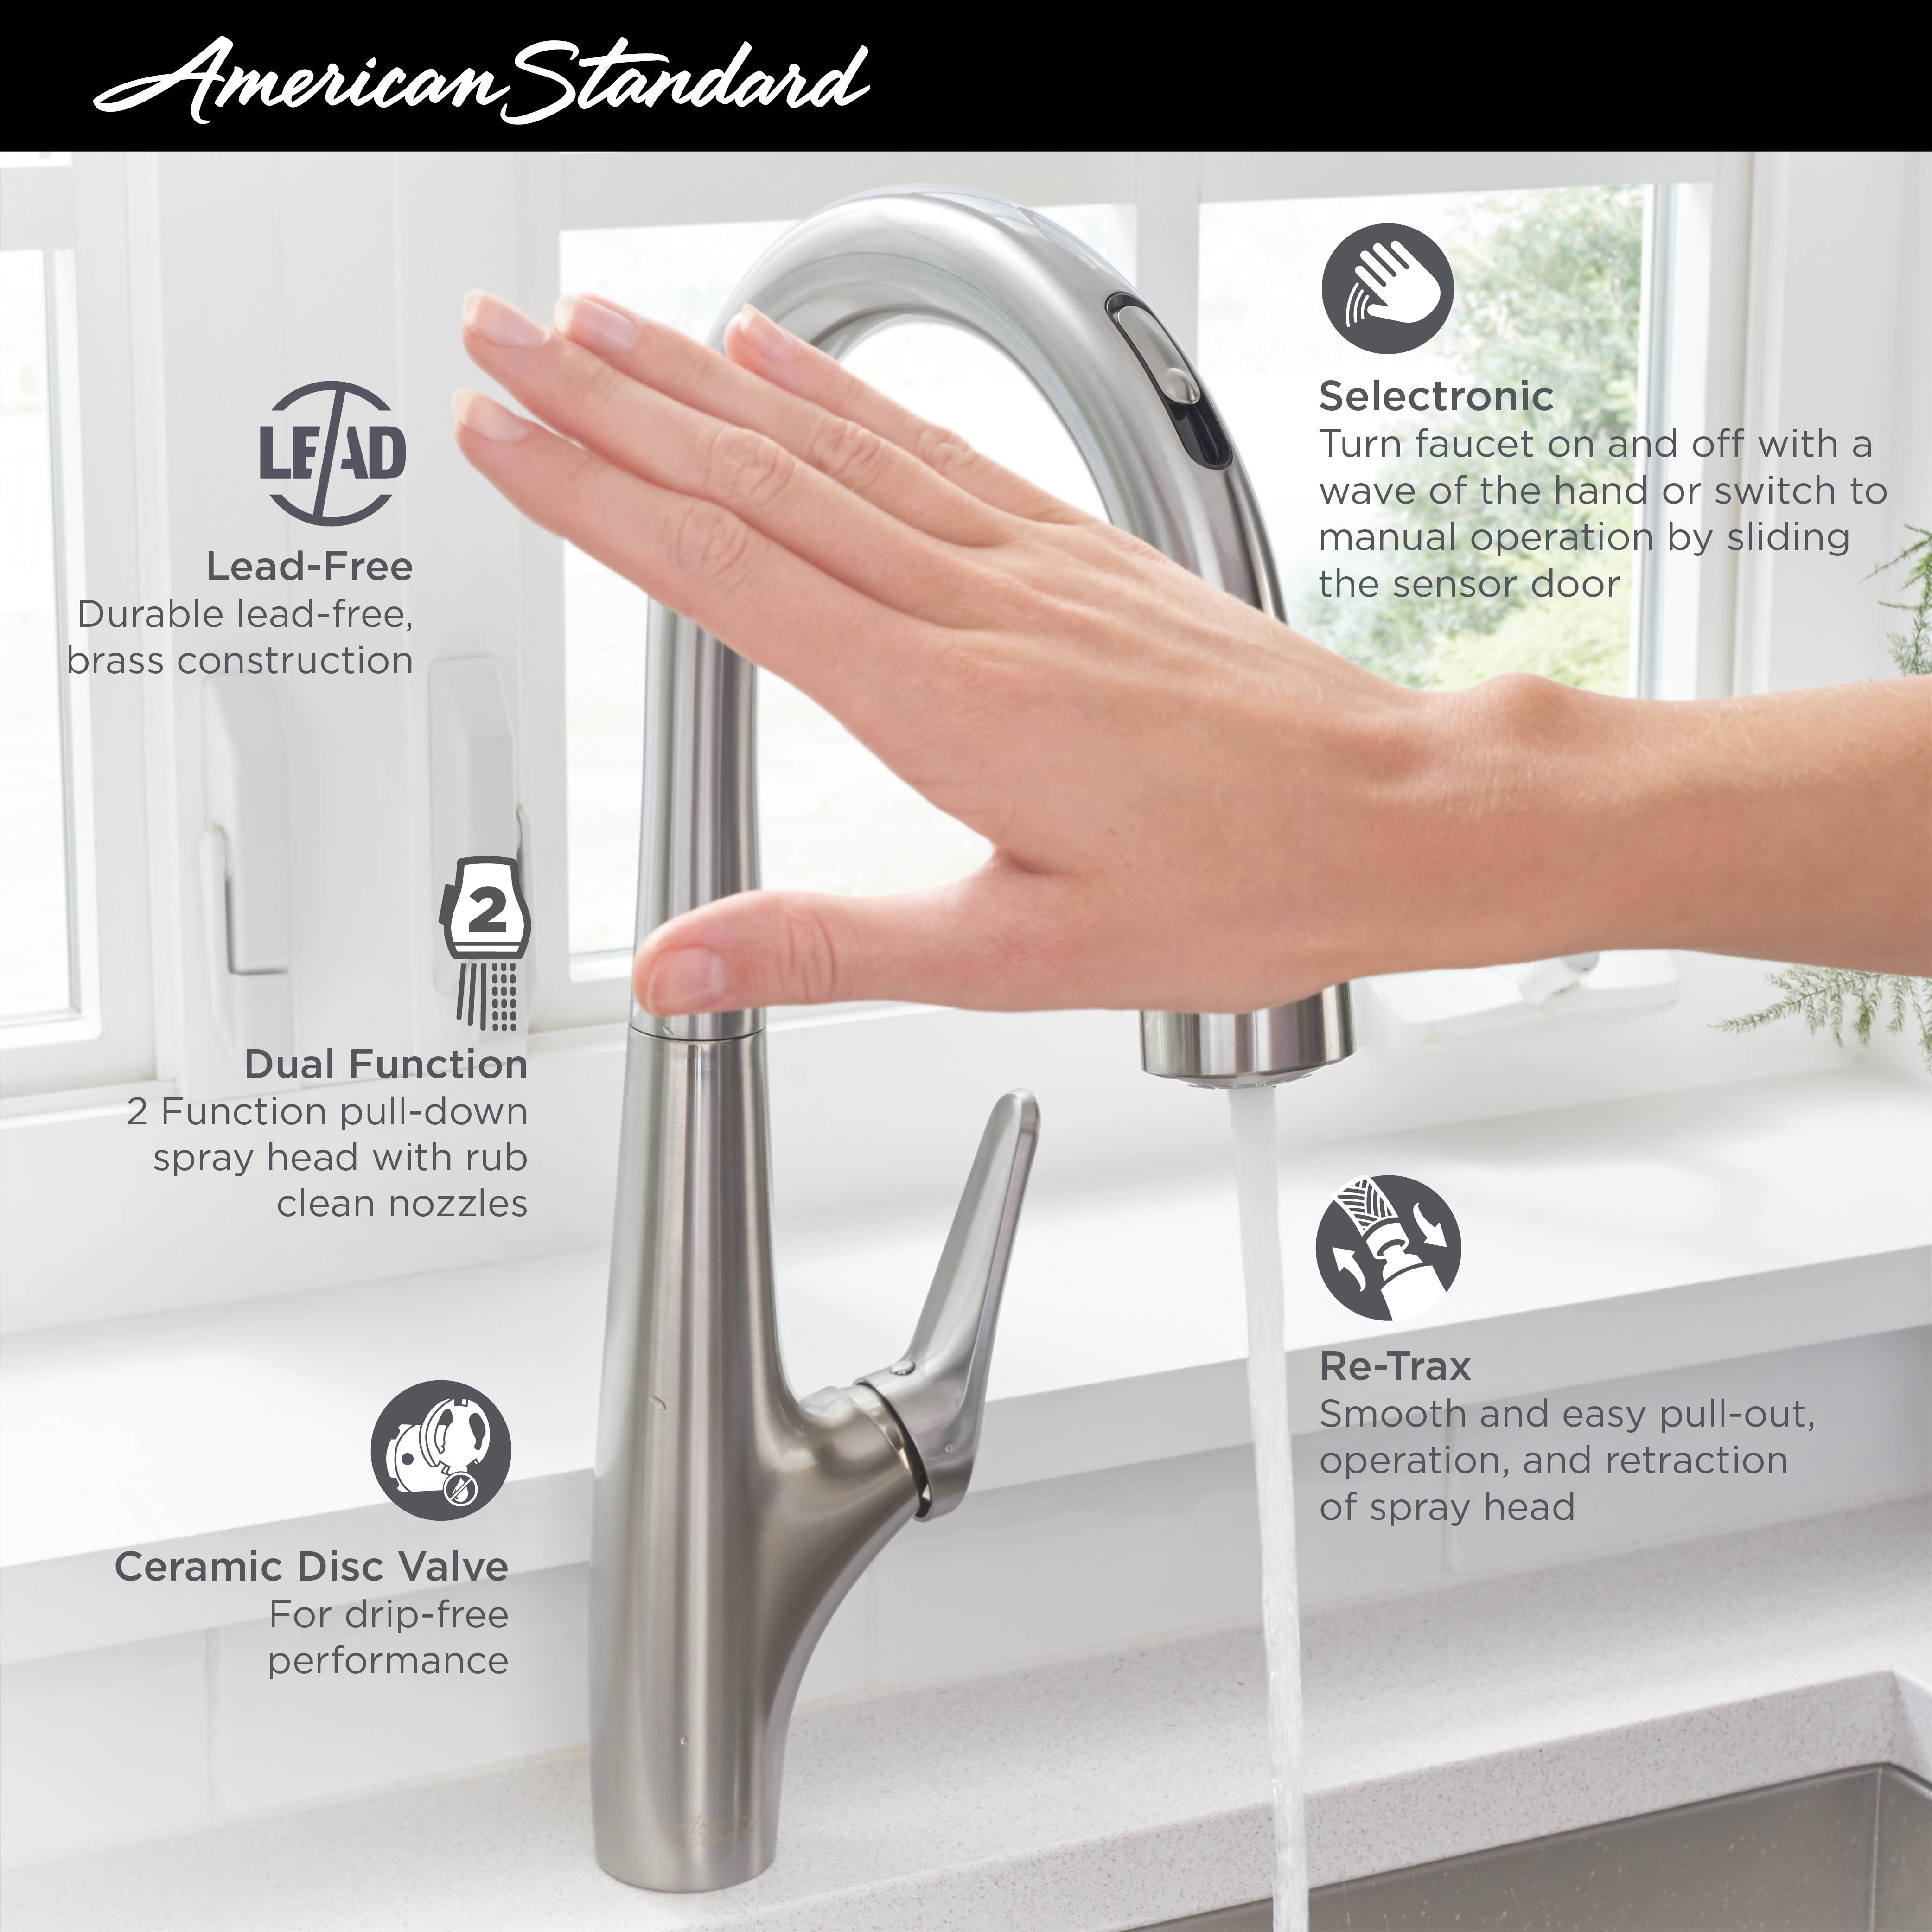 Avery™ Touchless Single-Handle Pull-Down Dual Spray Kitchen Faucet 1.5 gpm/5.7 L/min